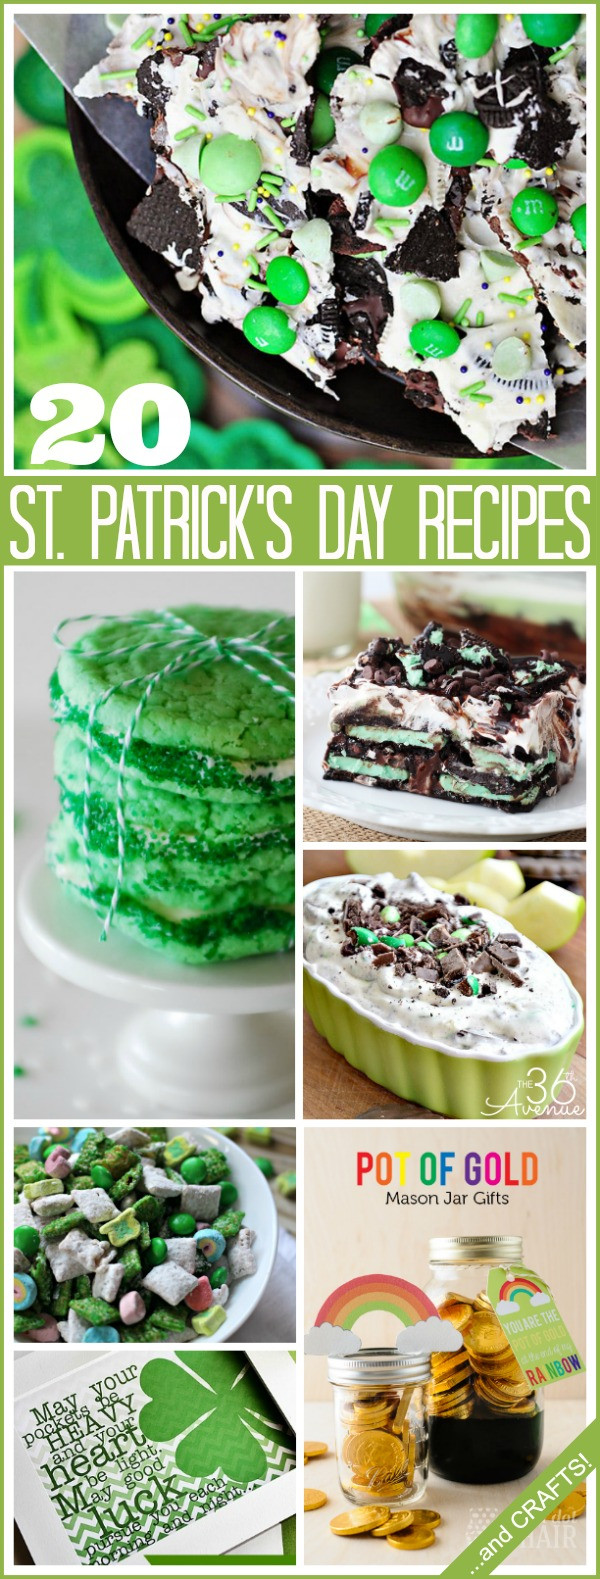 St Patrick's Day Meals Ideas
 The 36th AVENUE